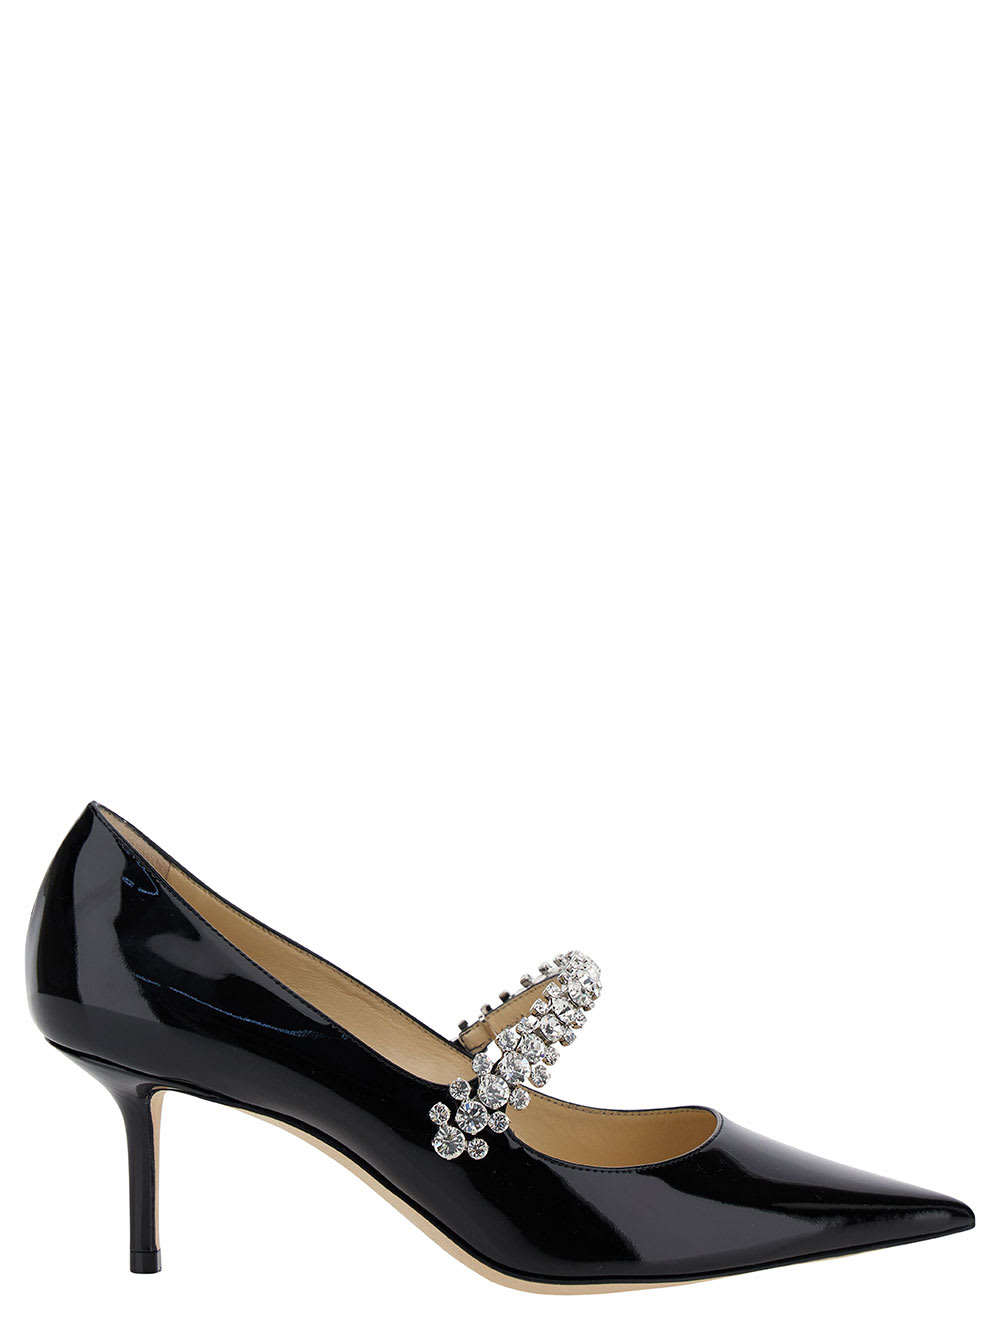 bing Pump Black Pumps With Crystal Strap In Patent Leather Woman